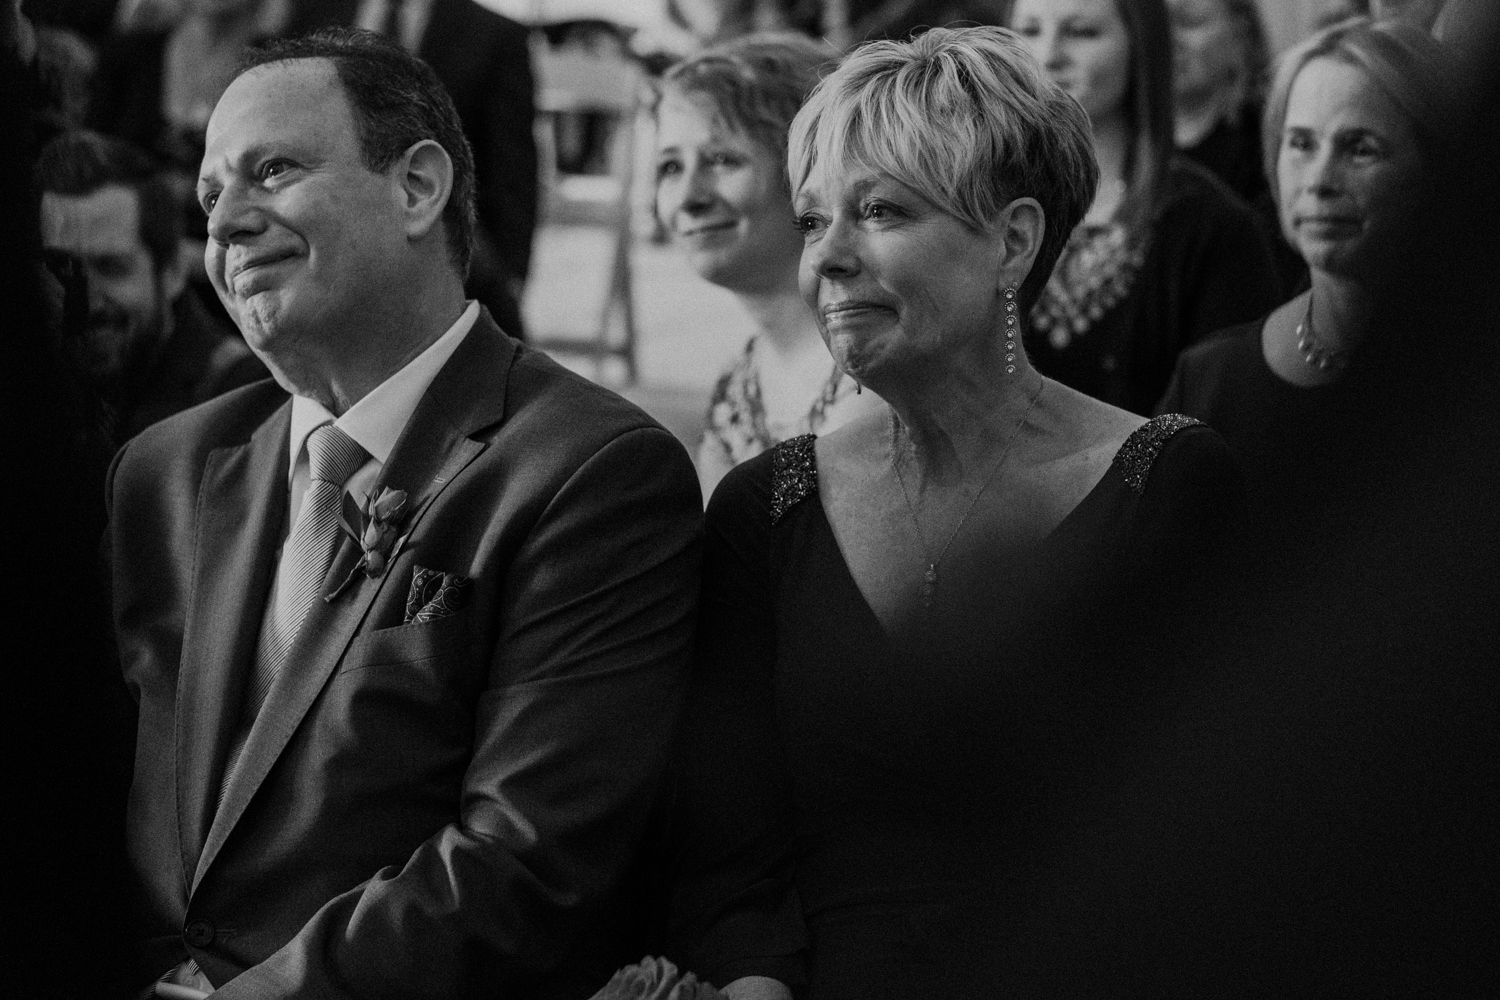 Groom's parents listen on with tears in eyes as they're son reads his vows